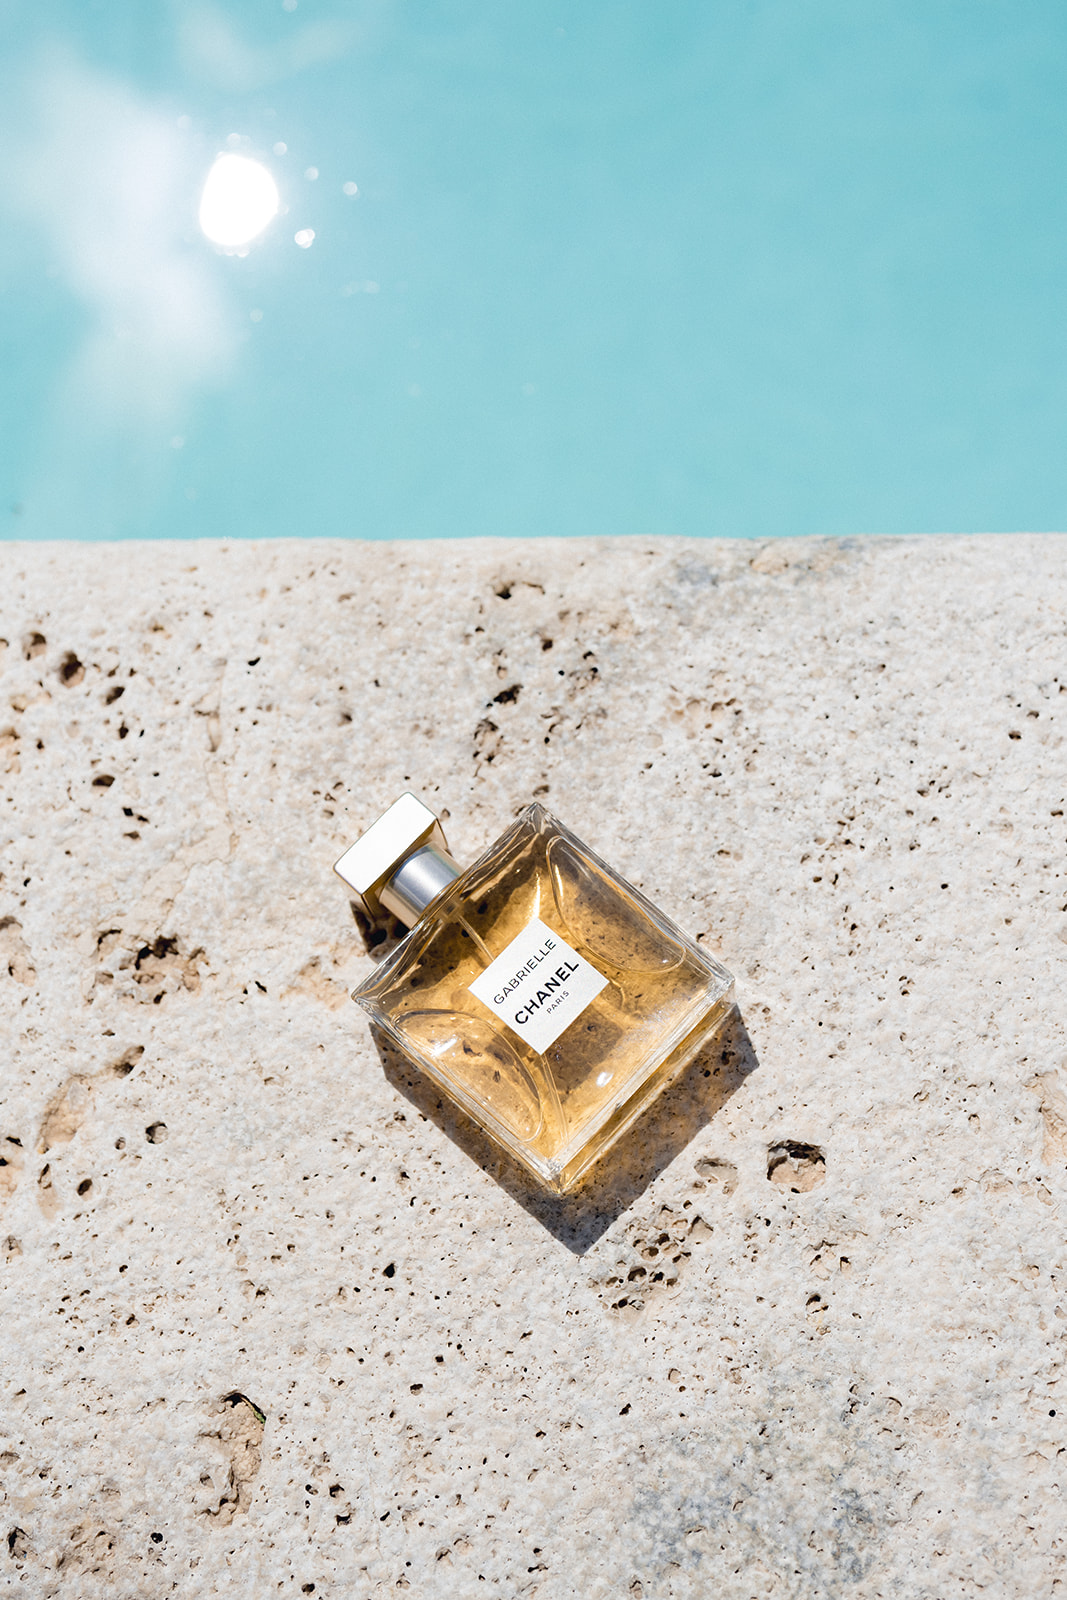 The bride's Chanel perfume by the poolside